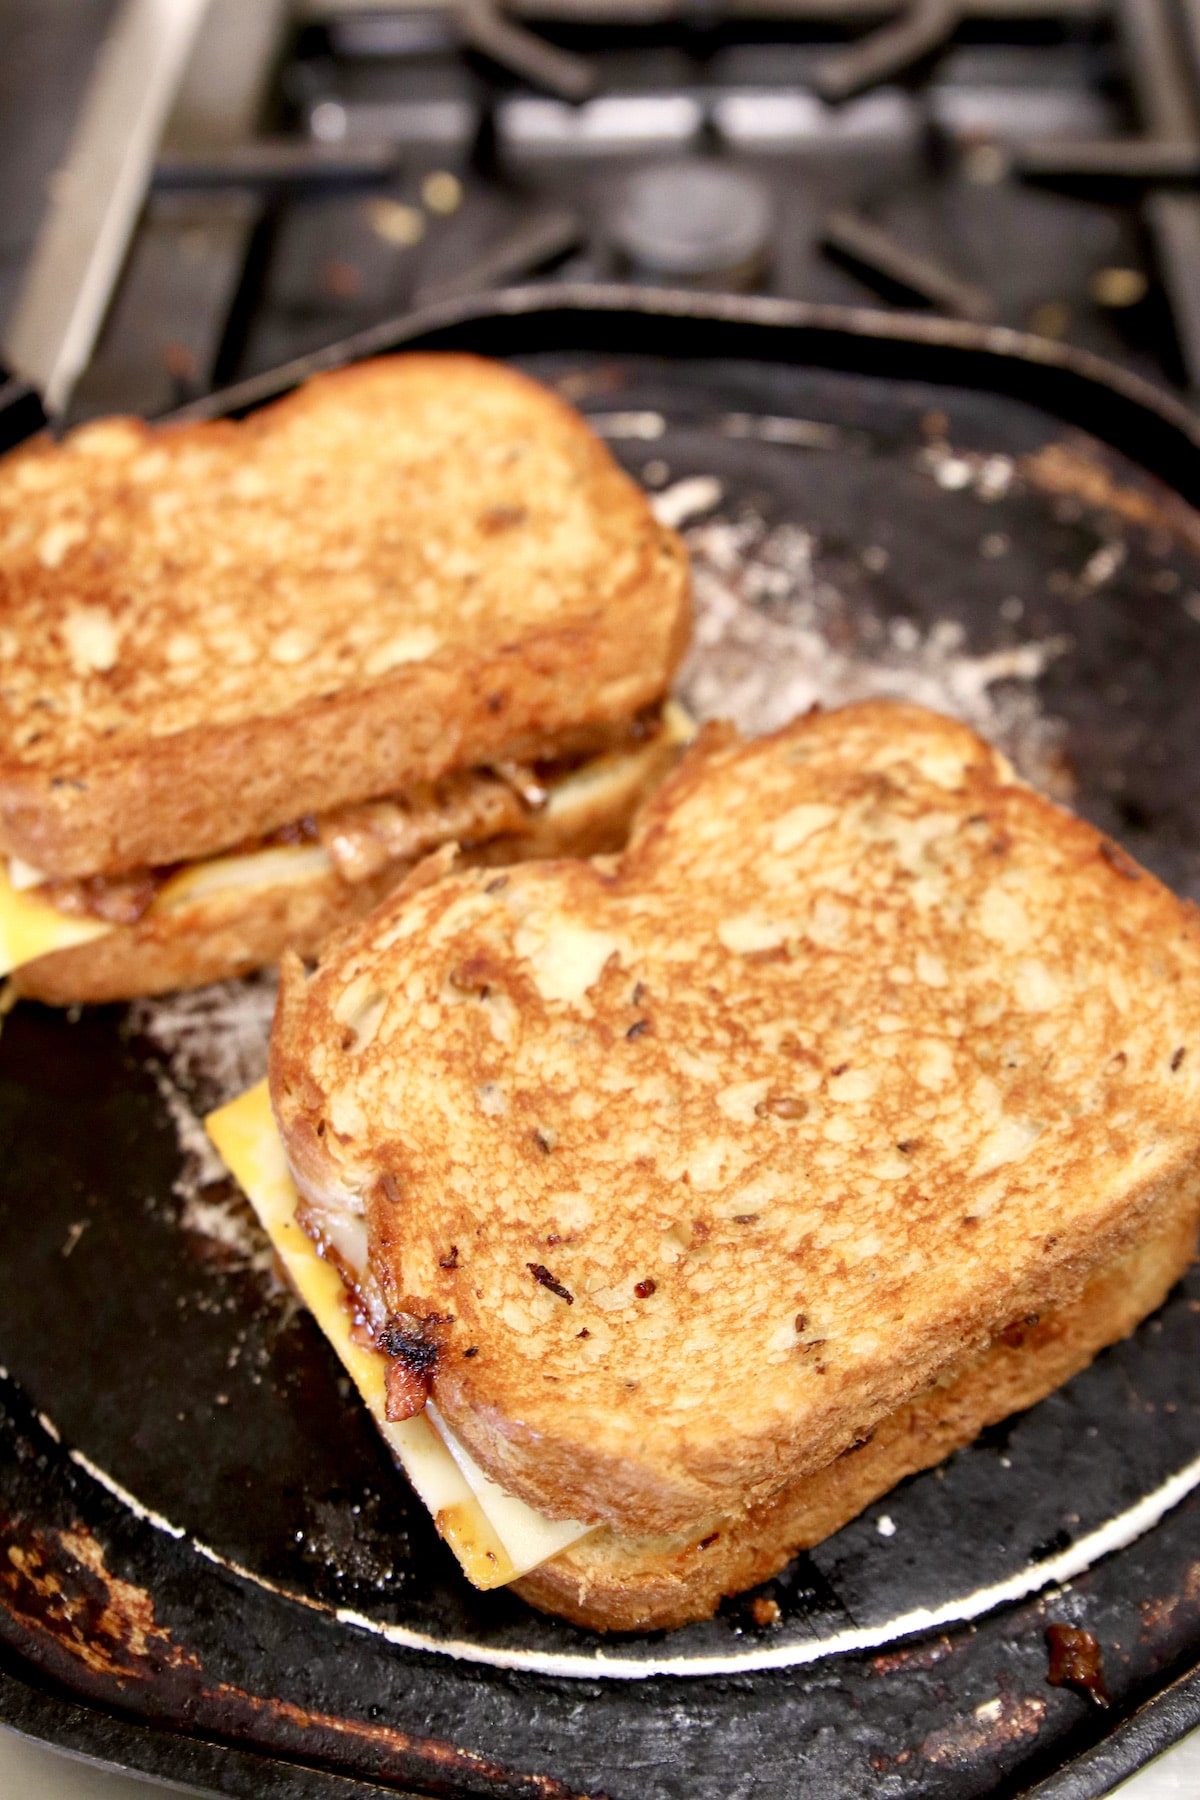 Toasting brisket grilled cheese sandwiches.